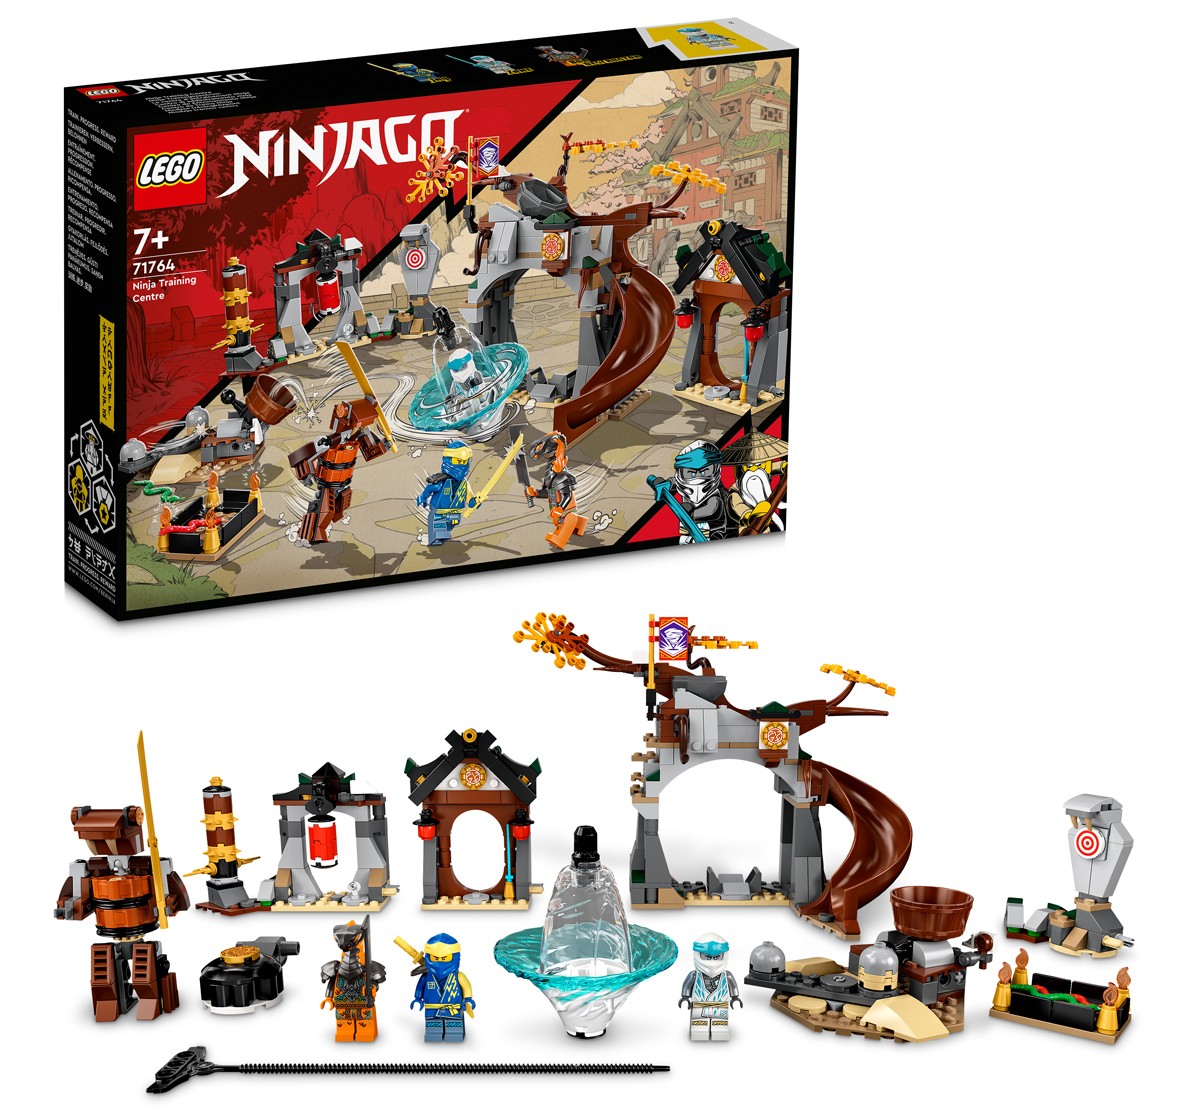 Lego NINJAGO Ninja Training Center Building Kit Featuring NINJAGO Zane and  Jay, a Snake Figure and a Spinning Toy Construction Toys for Kids Aged 7+